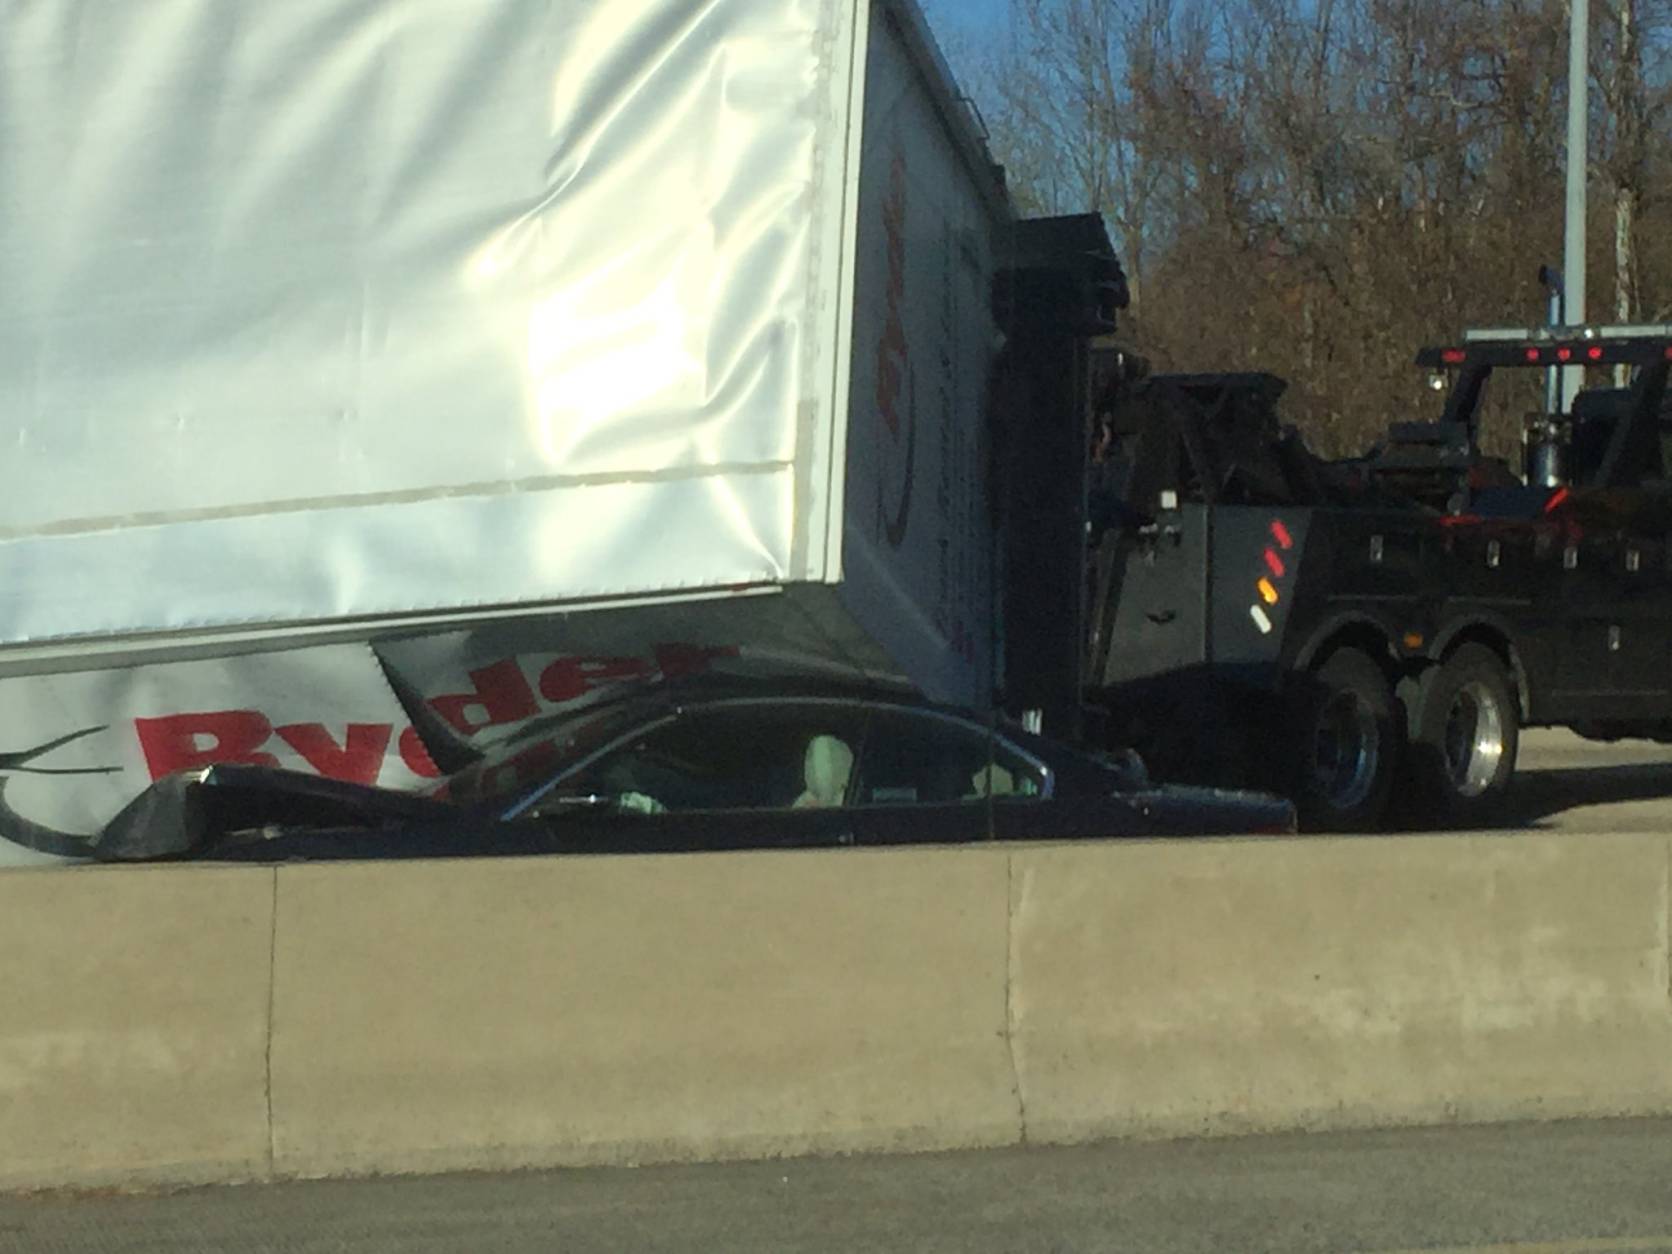 A truck crashed on top of two cars on the Outer Loop of the Capital Beltway near the American Legion Bridge on Nov. 23, 2016. (District Rising via Twitter)